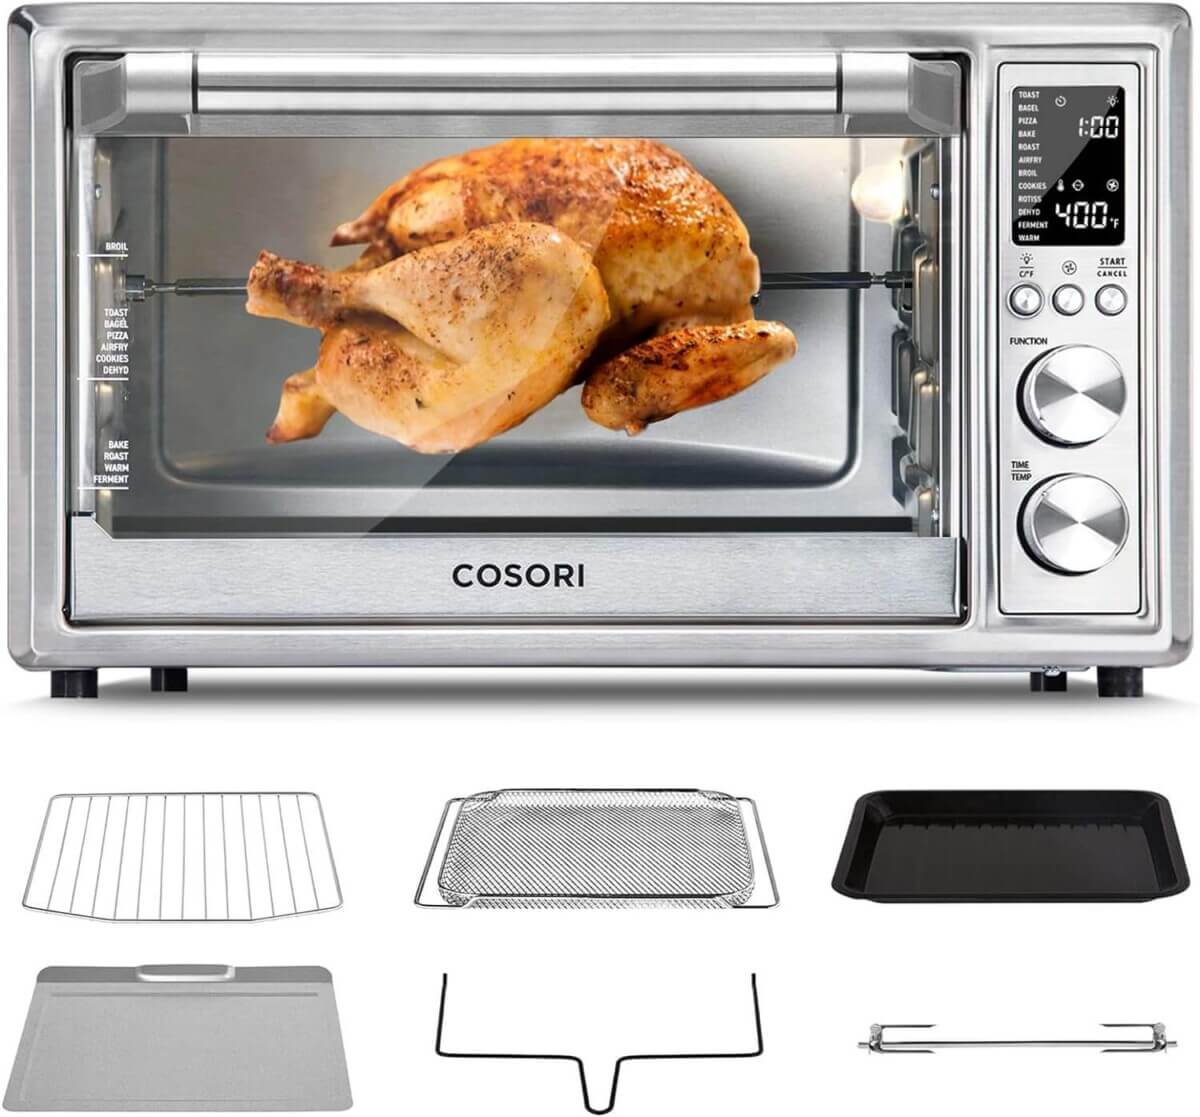 Vertical Oven - Countertop Rotisserie Oven with Baking & Roasting